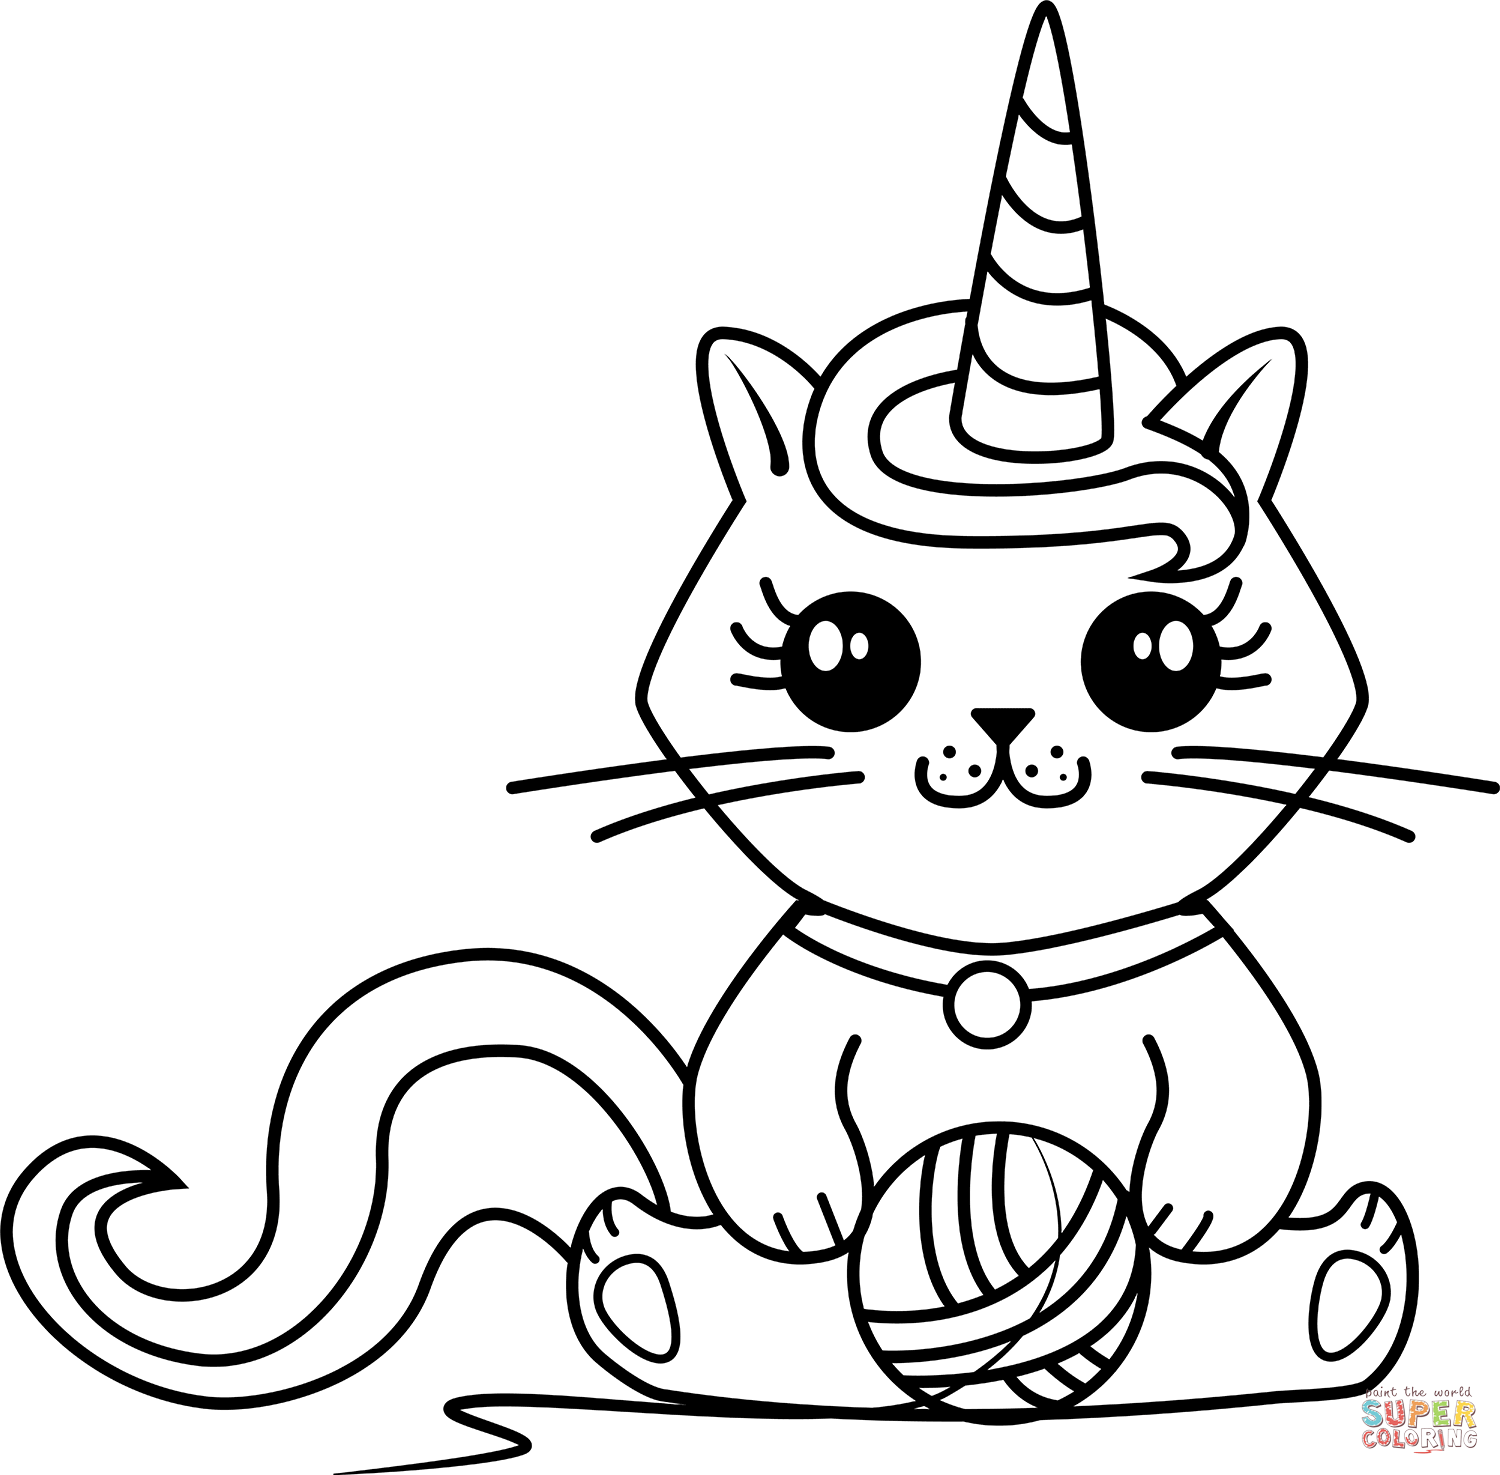 Unicorn Kitty coloring page | Free Printable Coloring Pages